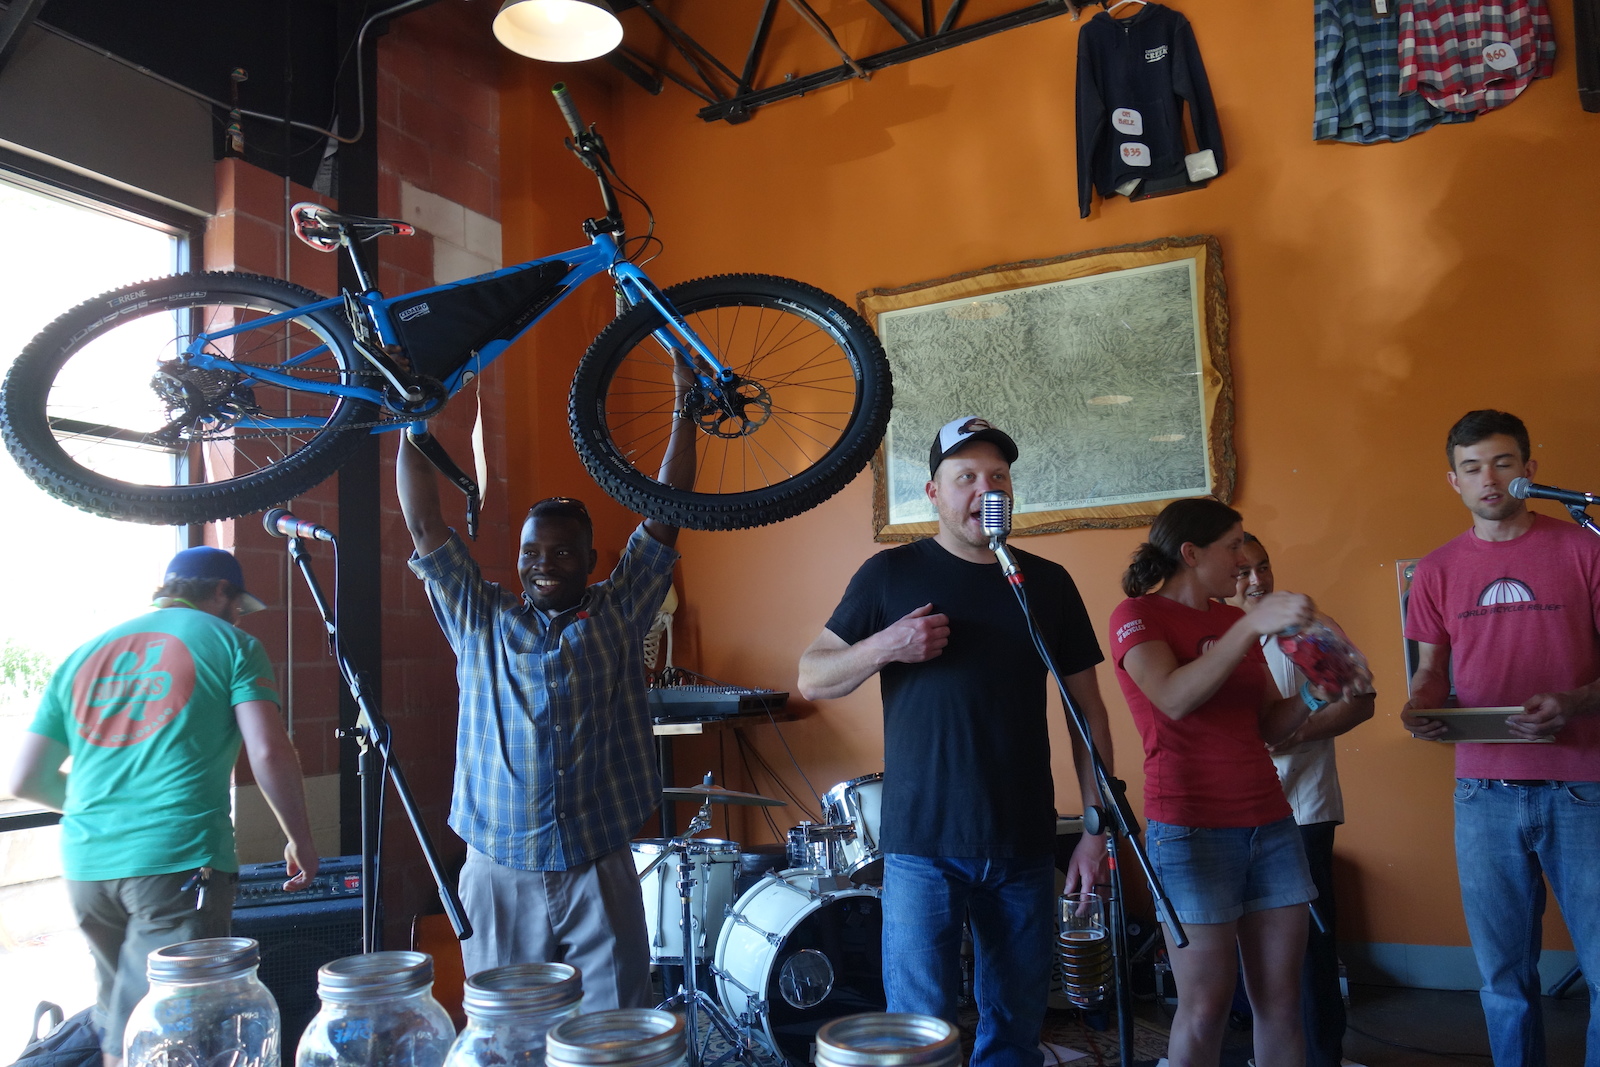 Third Annual Brews for Bikes A World Bicycle Relief Event